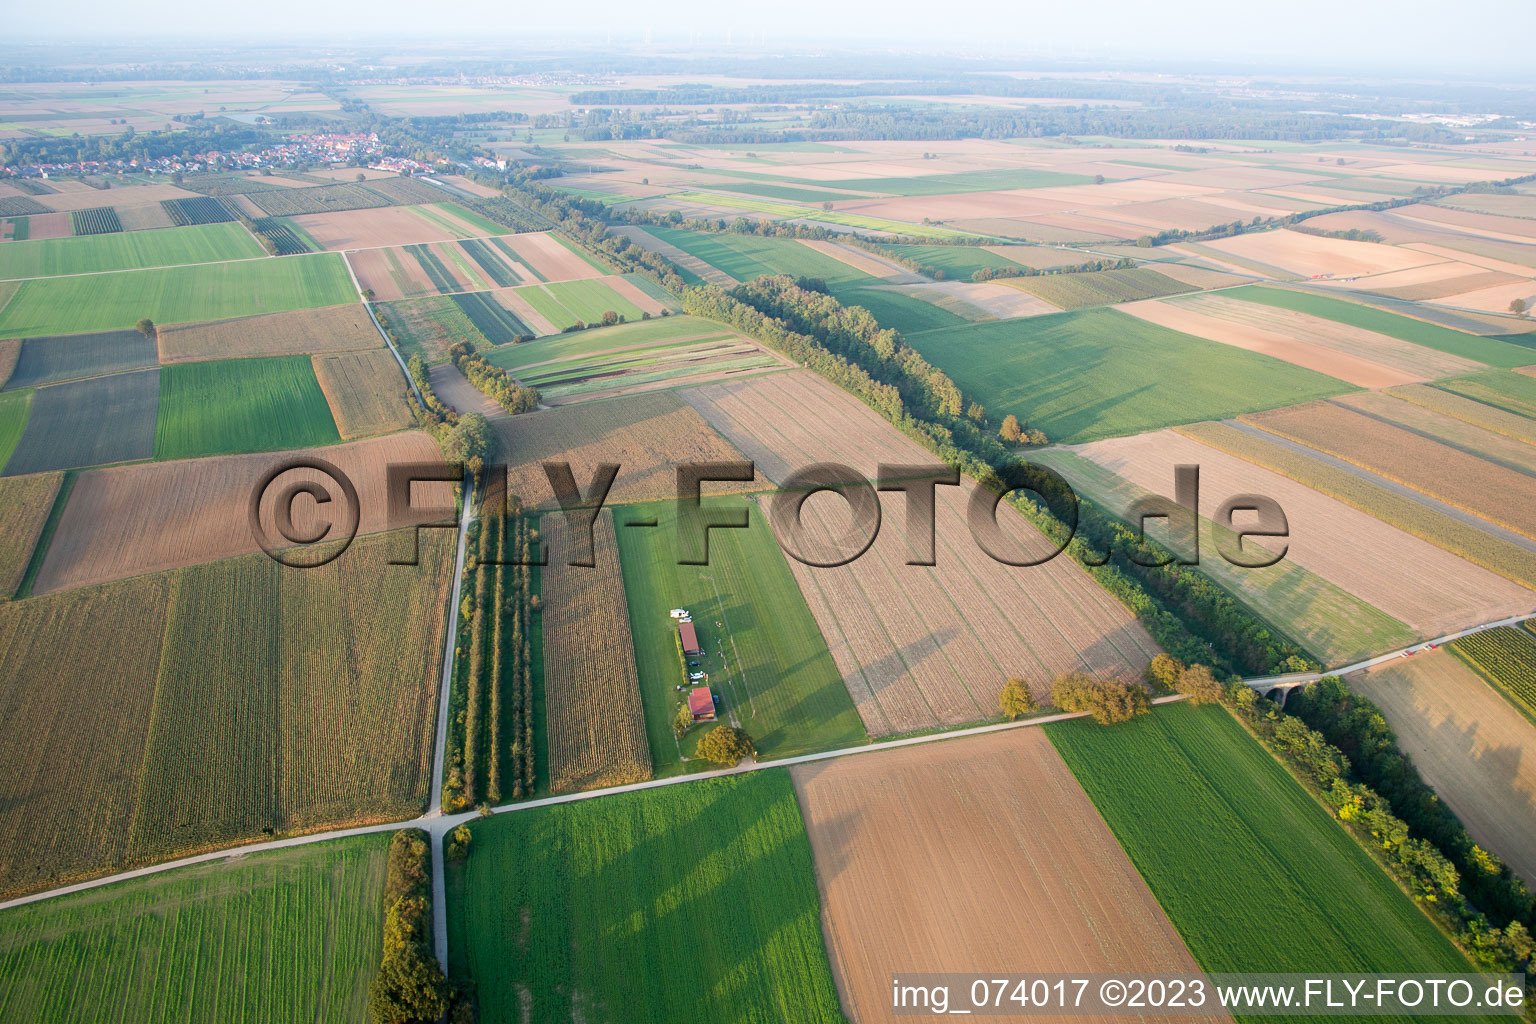 Model airfield in Freckenfeld in the state Rhineland-Palatinate, Germany seen from above